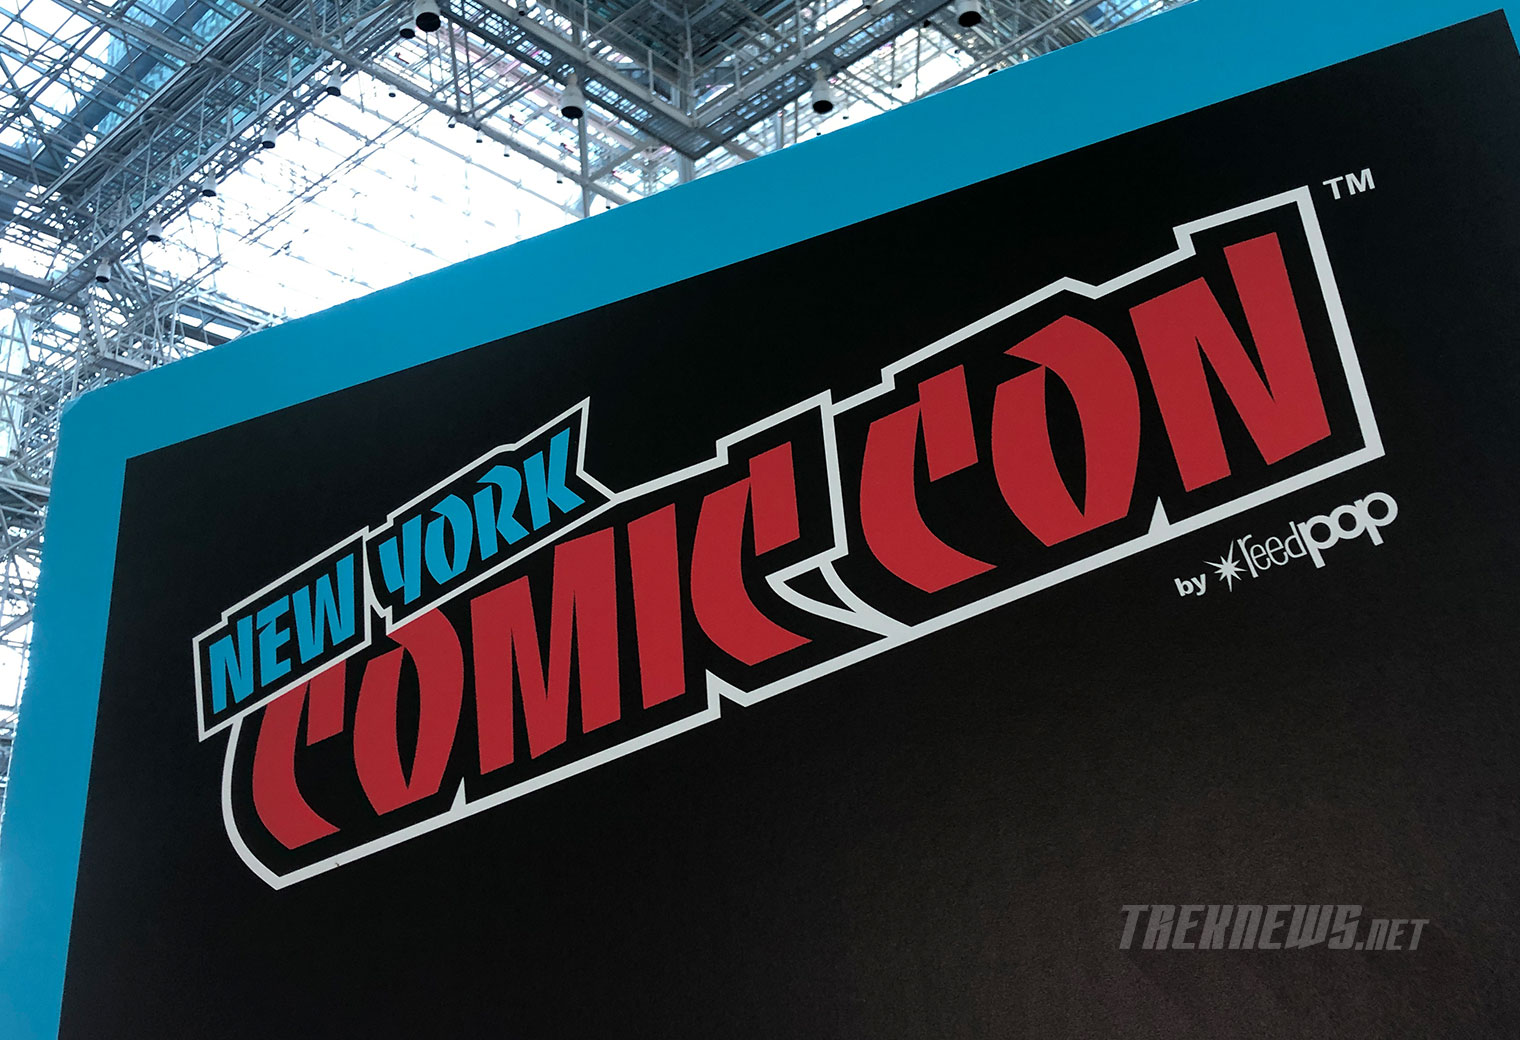 New York Comic Con Cancelled, Digital Event to Feature Star Trek Panel